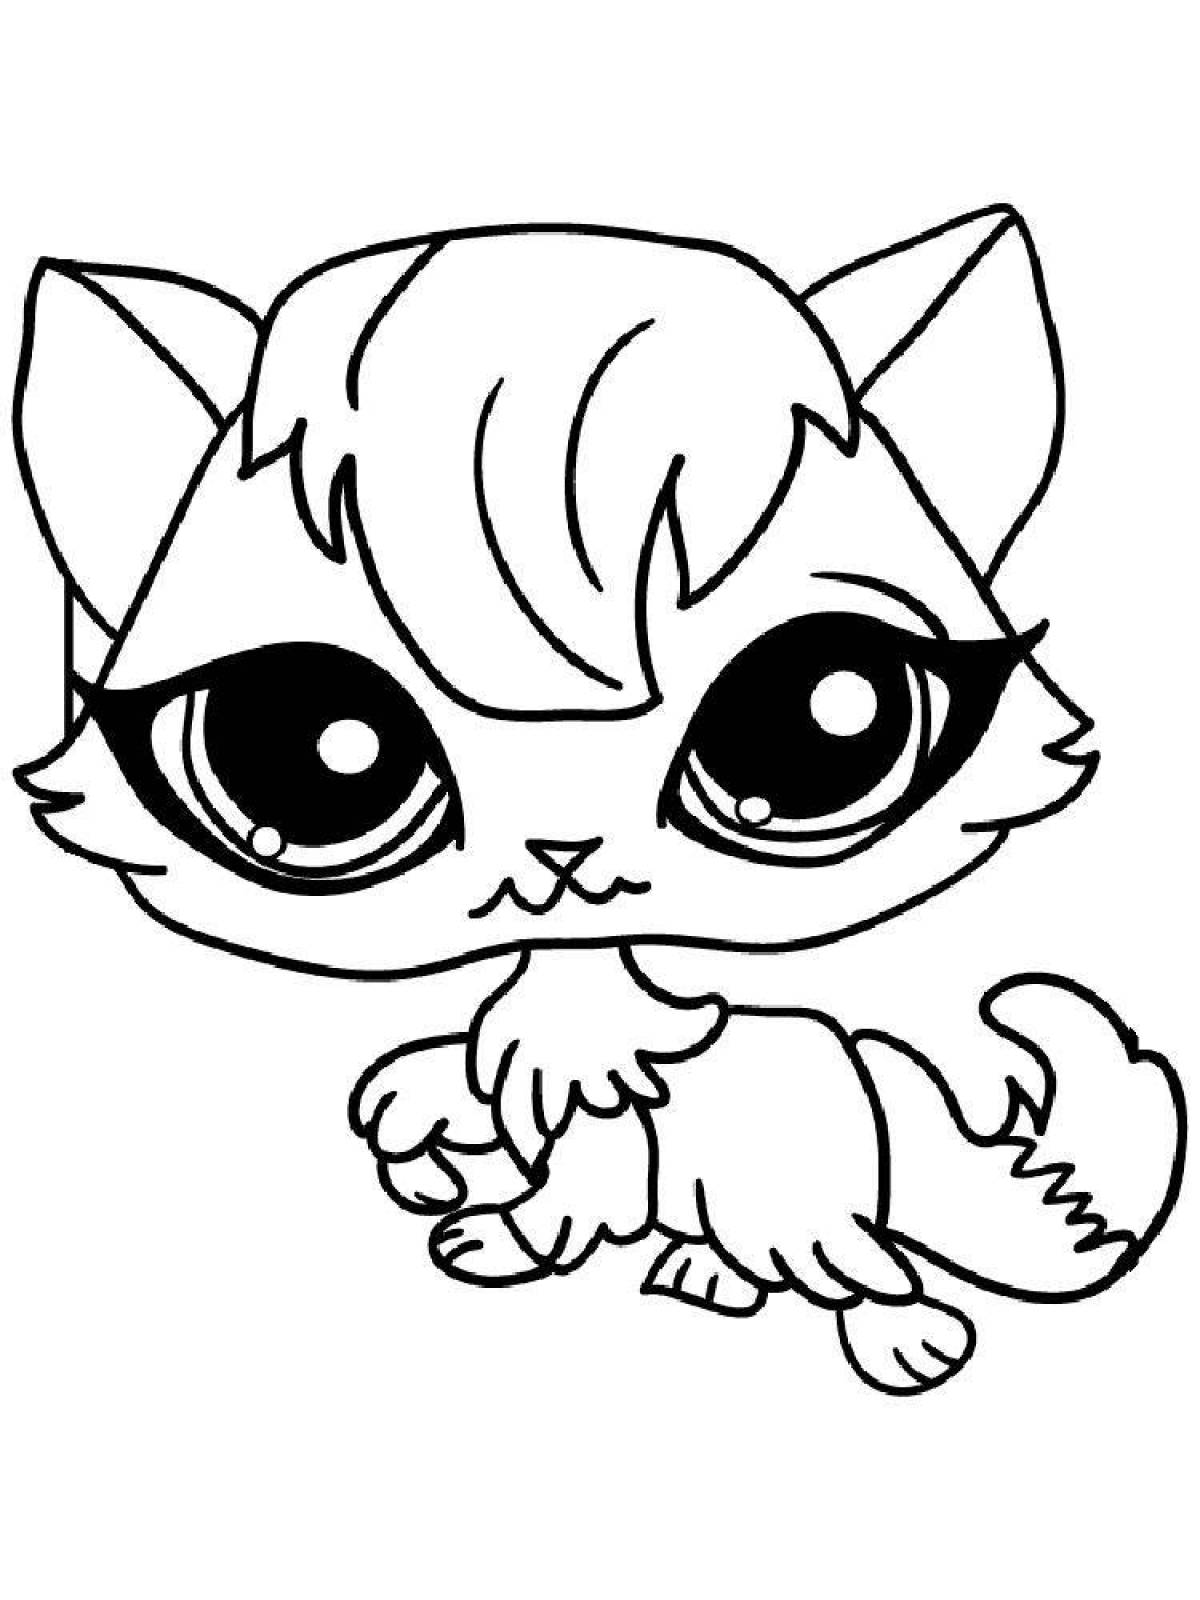 Snuggable cute cat coloring pages for girls